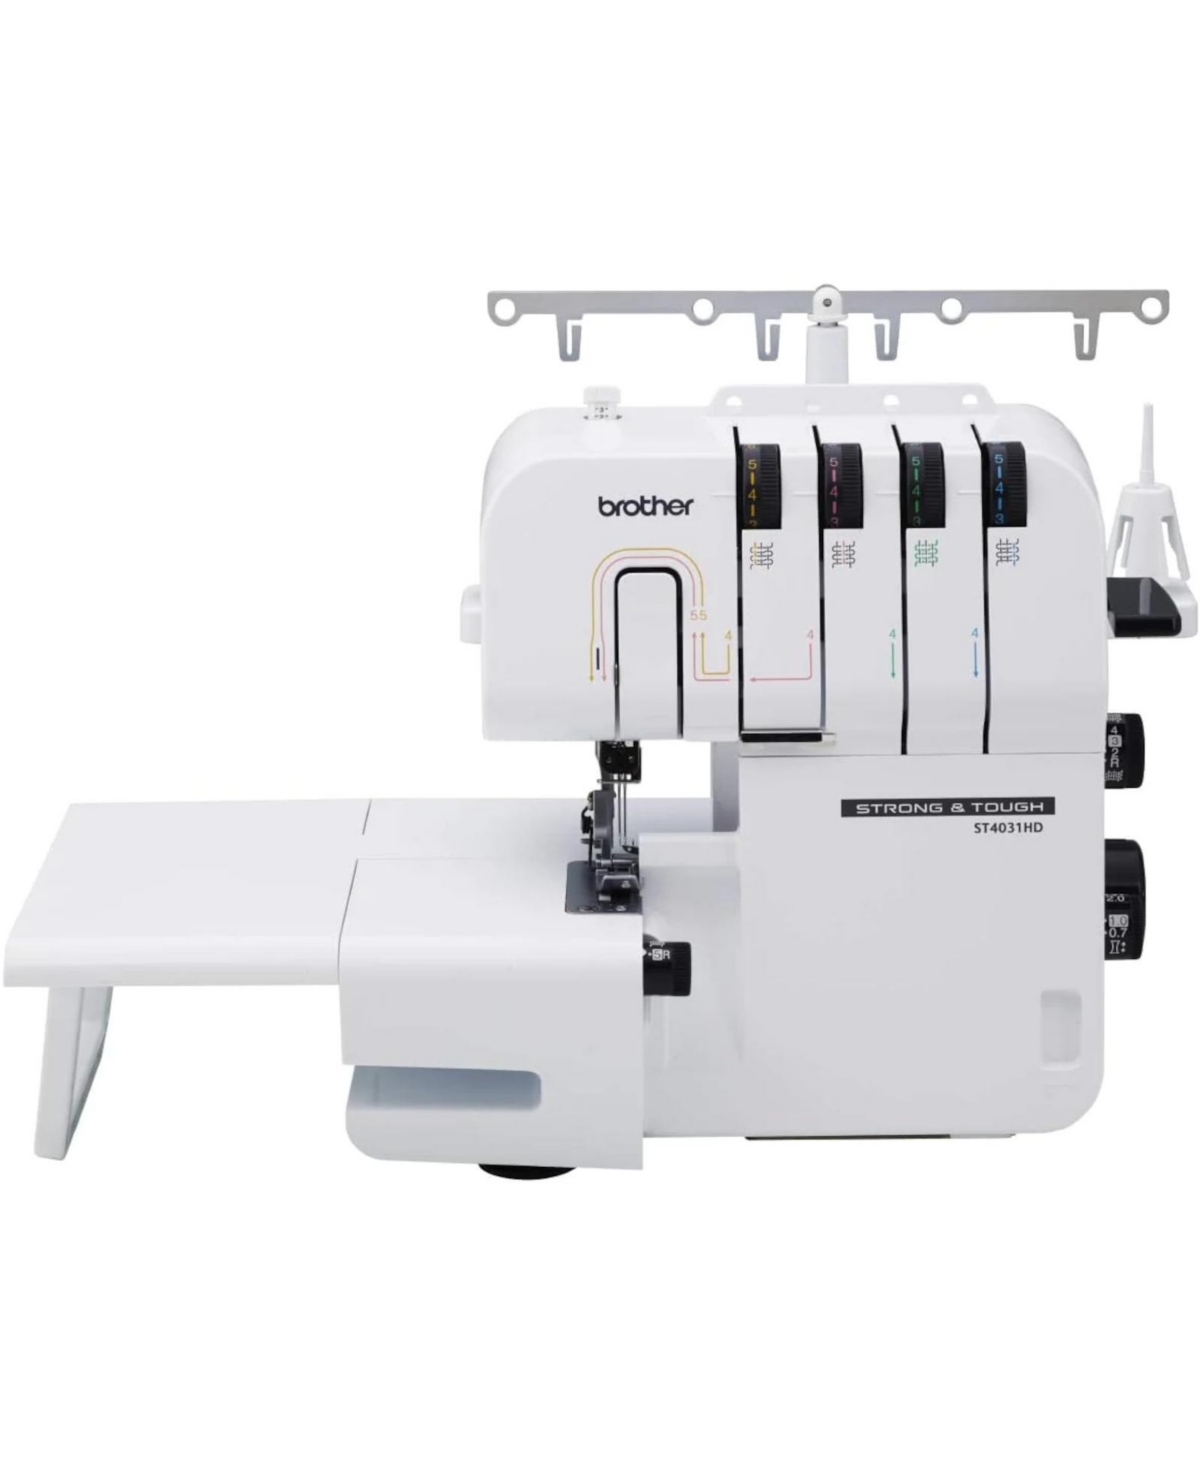 ST4031HD Strong and Tough Serger Machine - White